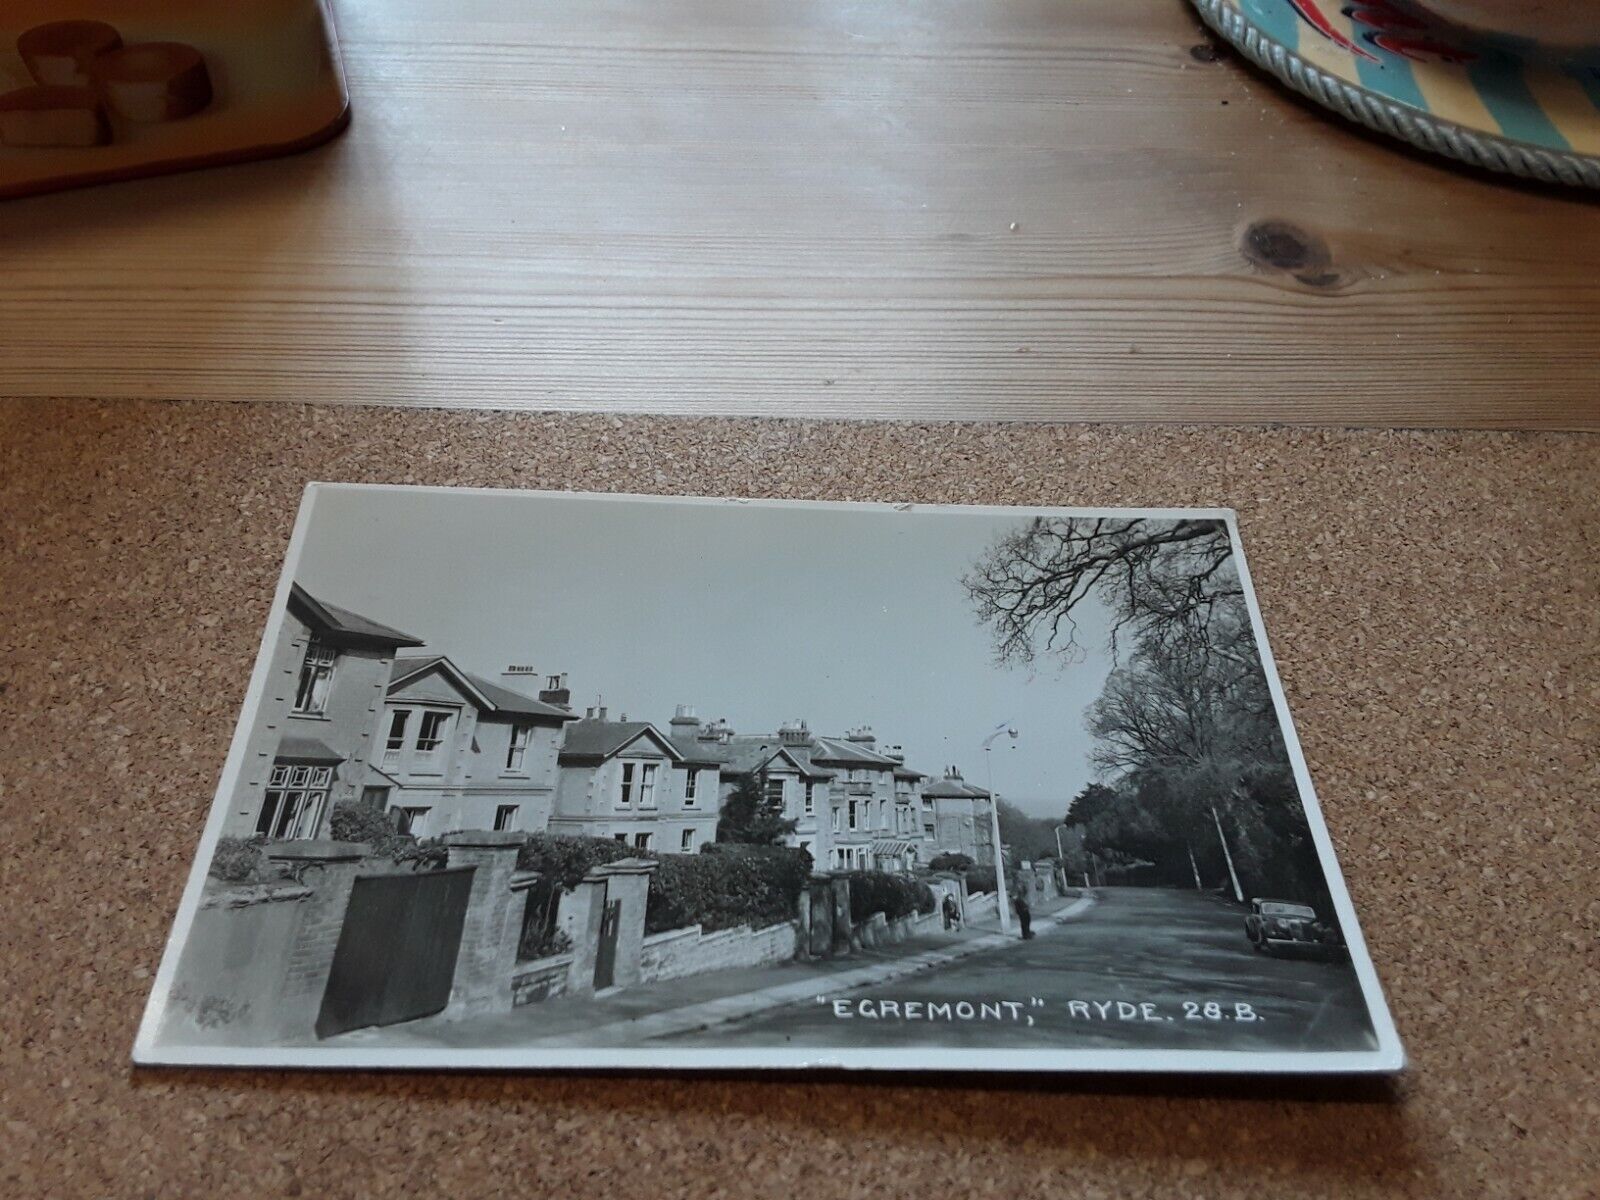 House Clearance - POSTCARD EGREMONT RYDE ISLE OF WIGHT EASTHILL ROAD HOUSES / PROPERTIES & OLD CAR